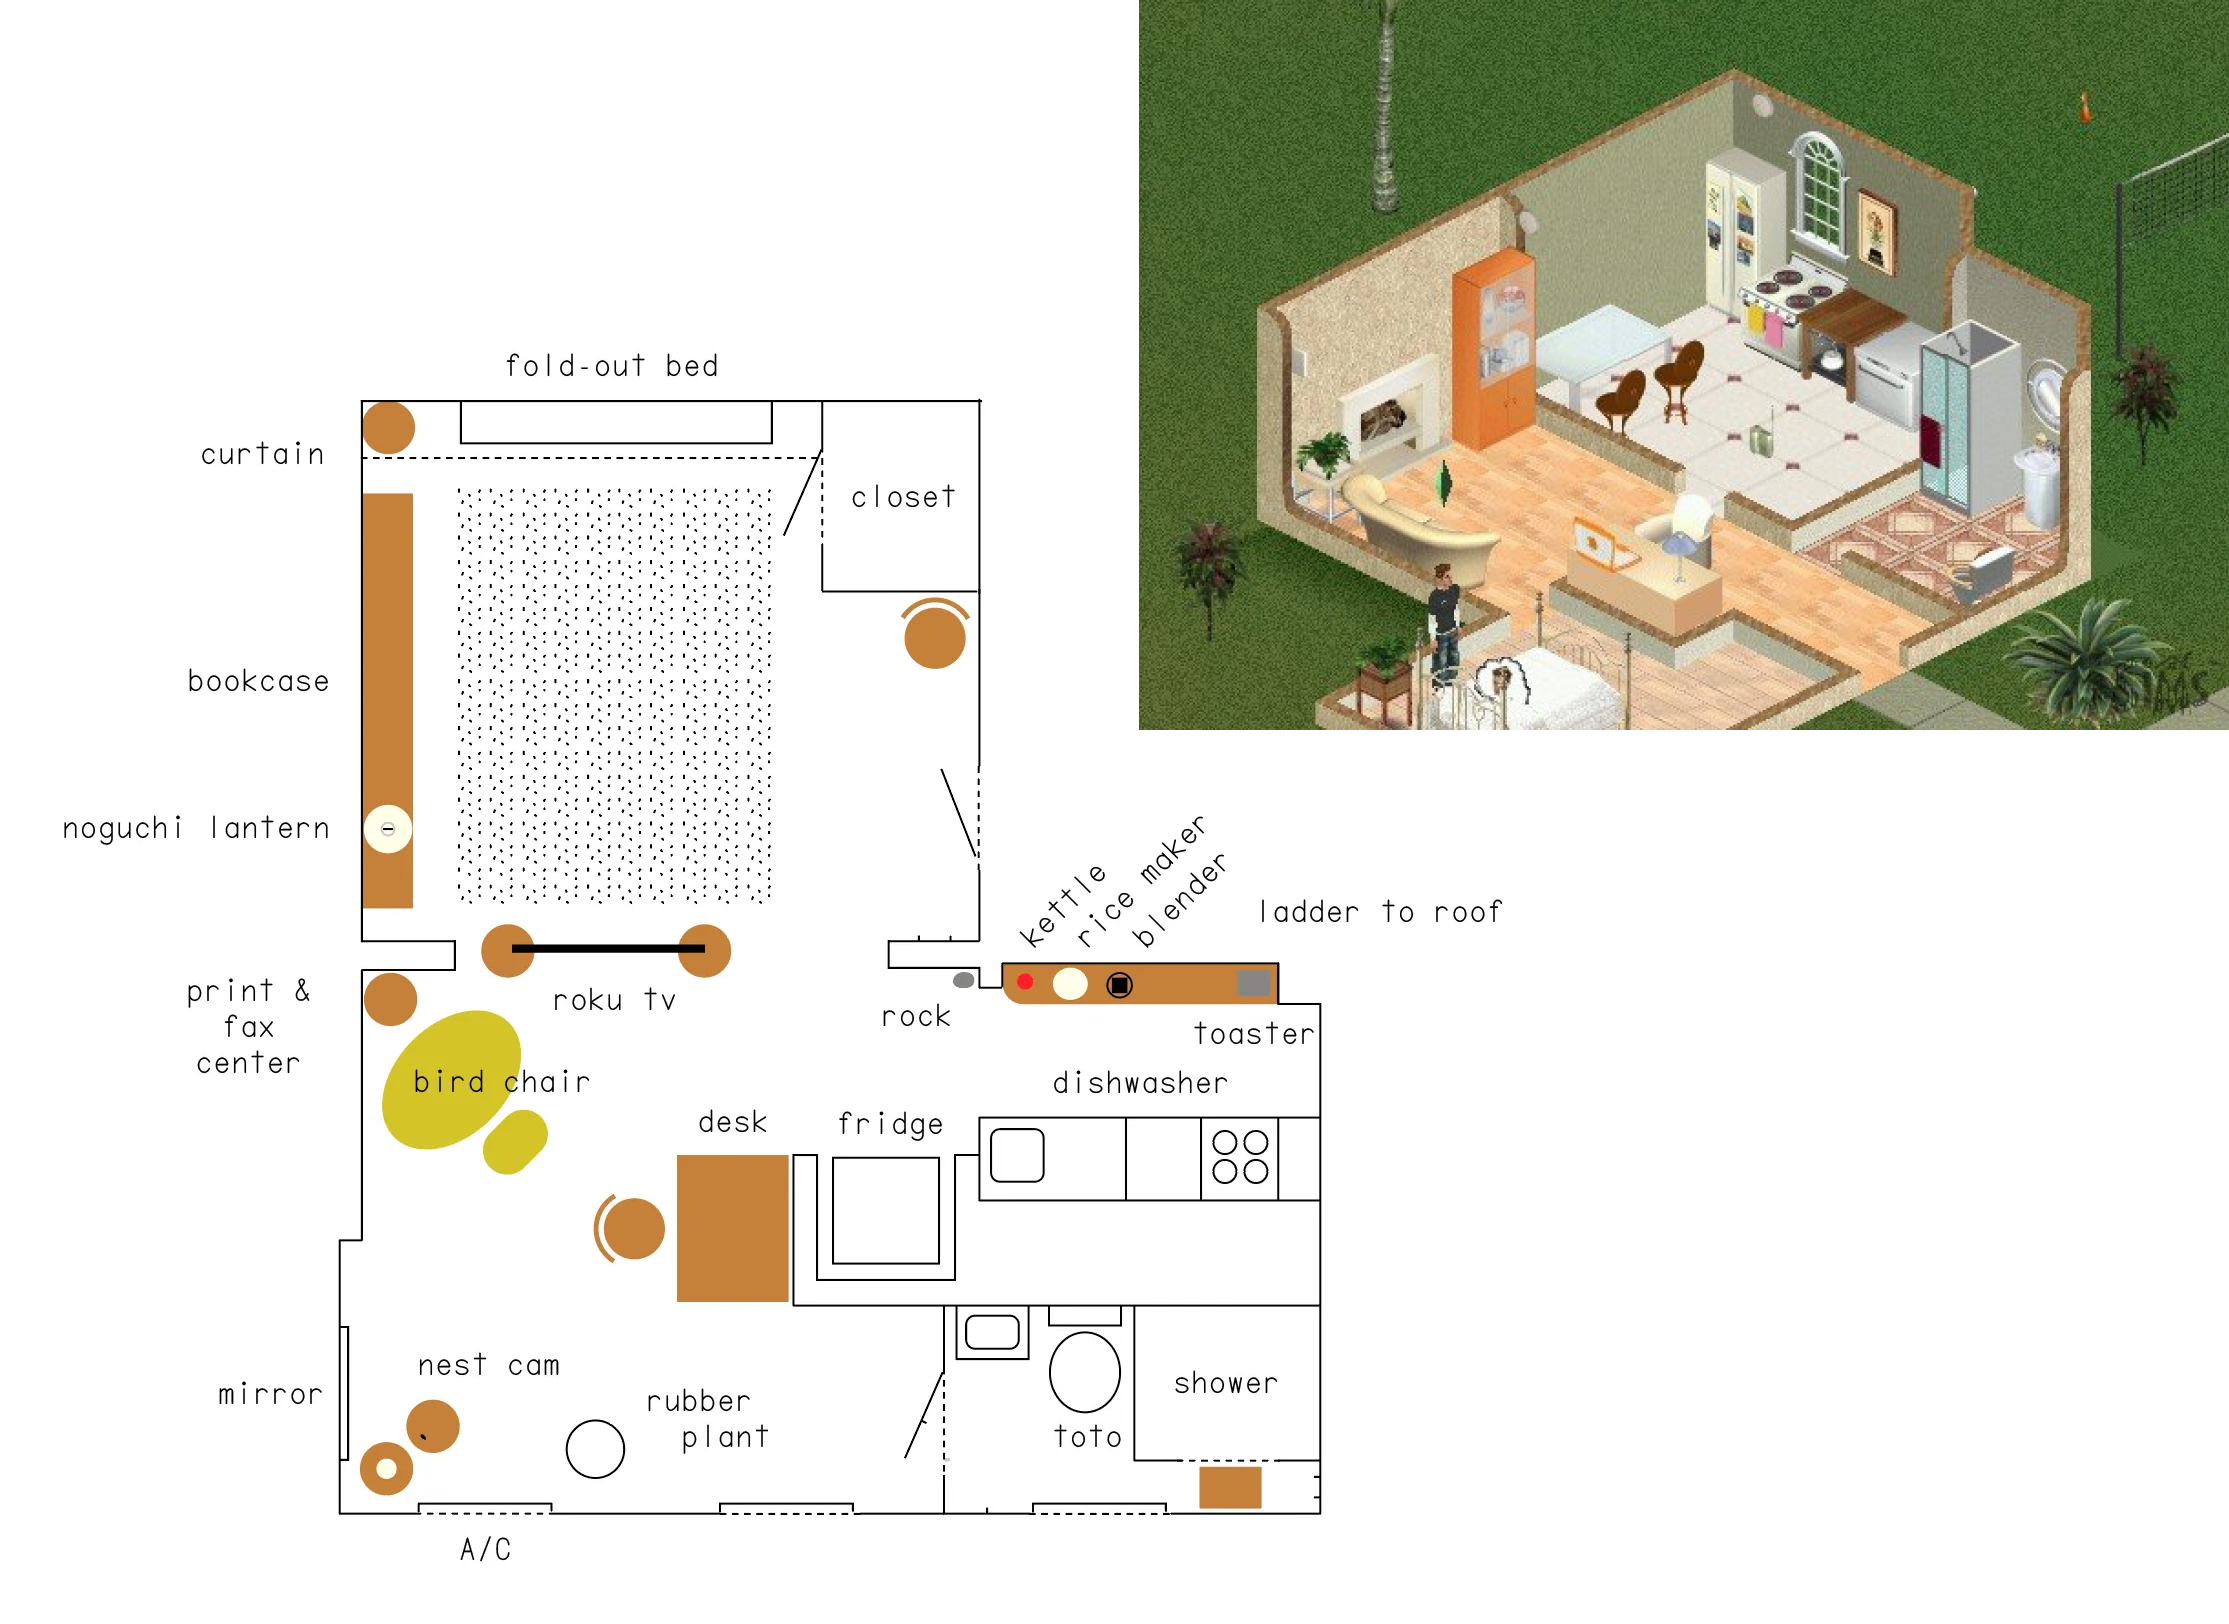 On the left, a blueprint of an apartment, with labels pointing out things including rice maker, bird chair, print and fax center, noguchi lantern, fold-out bed. on the right, an isometric 3d model of a room from the videogame Sims